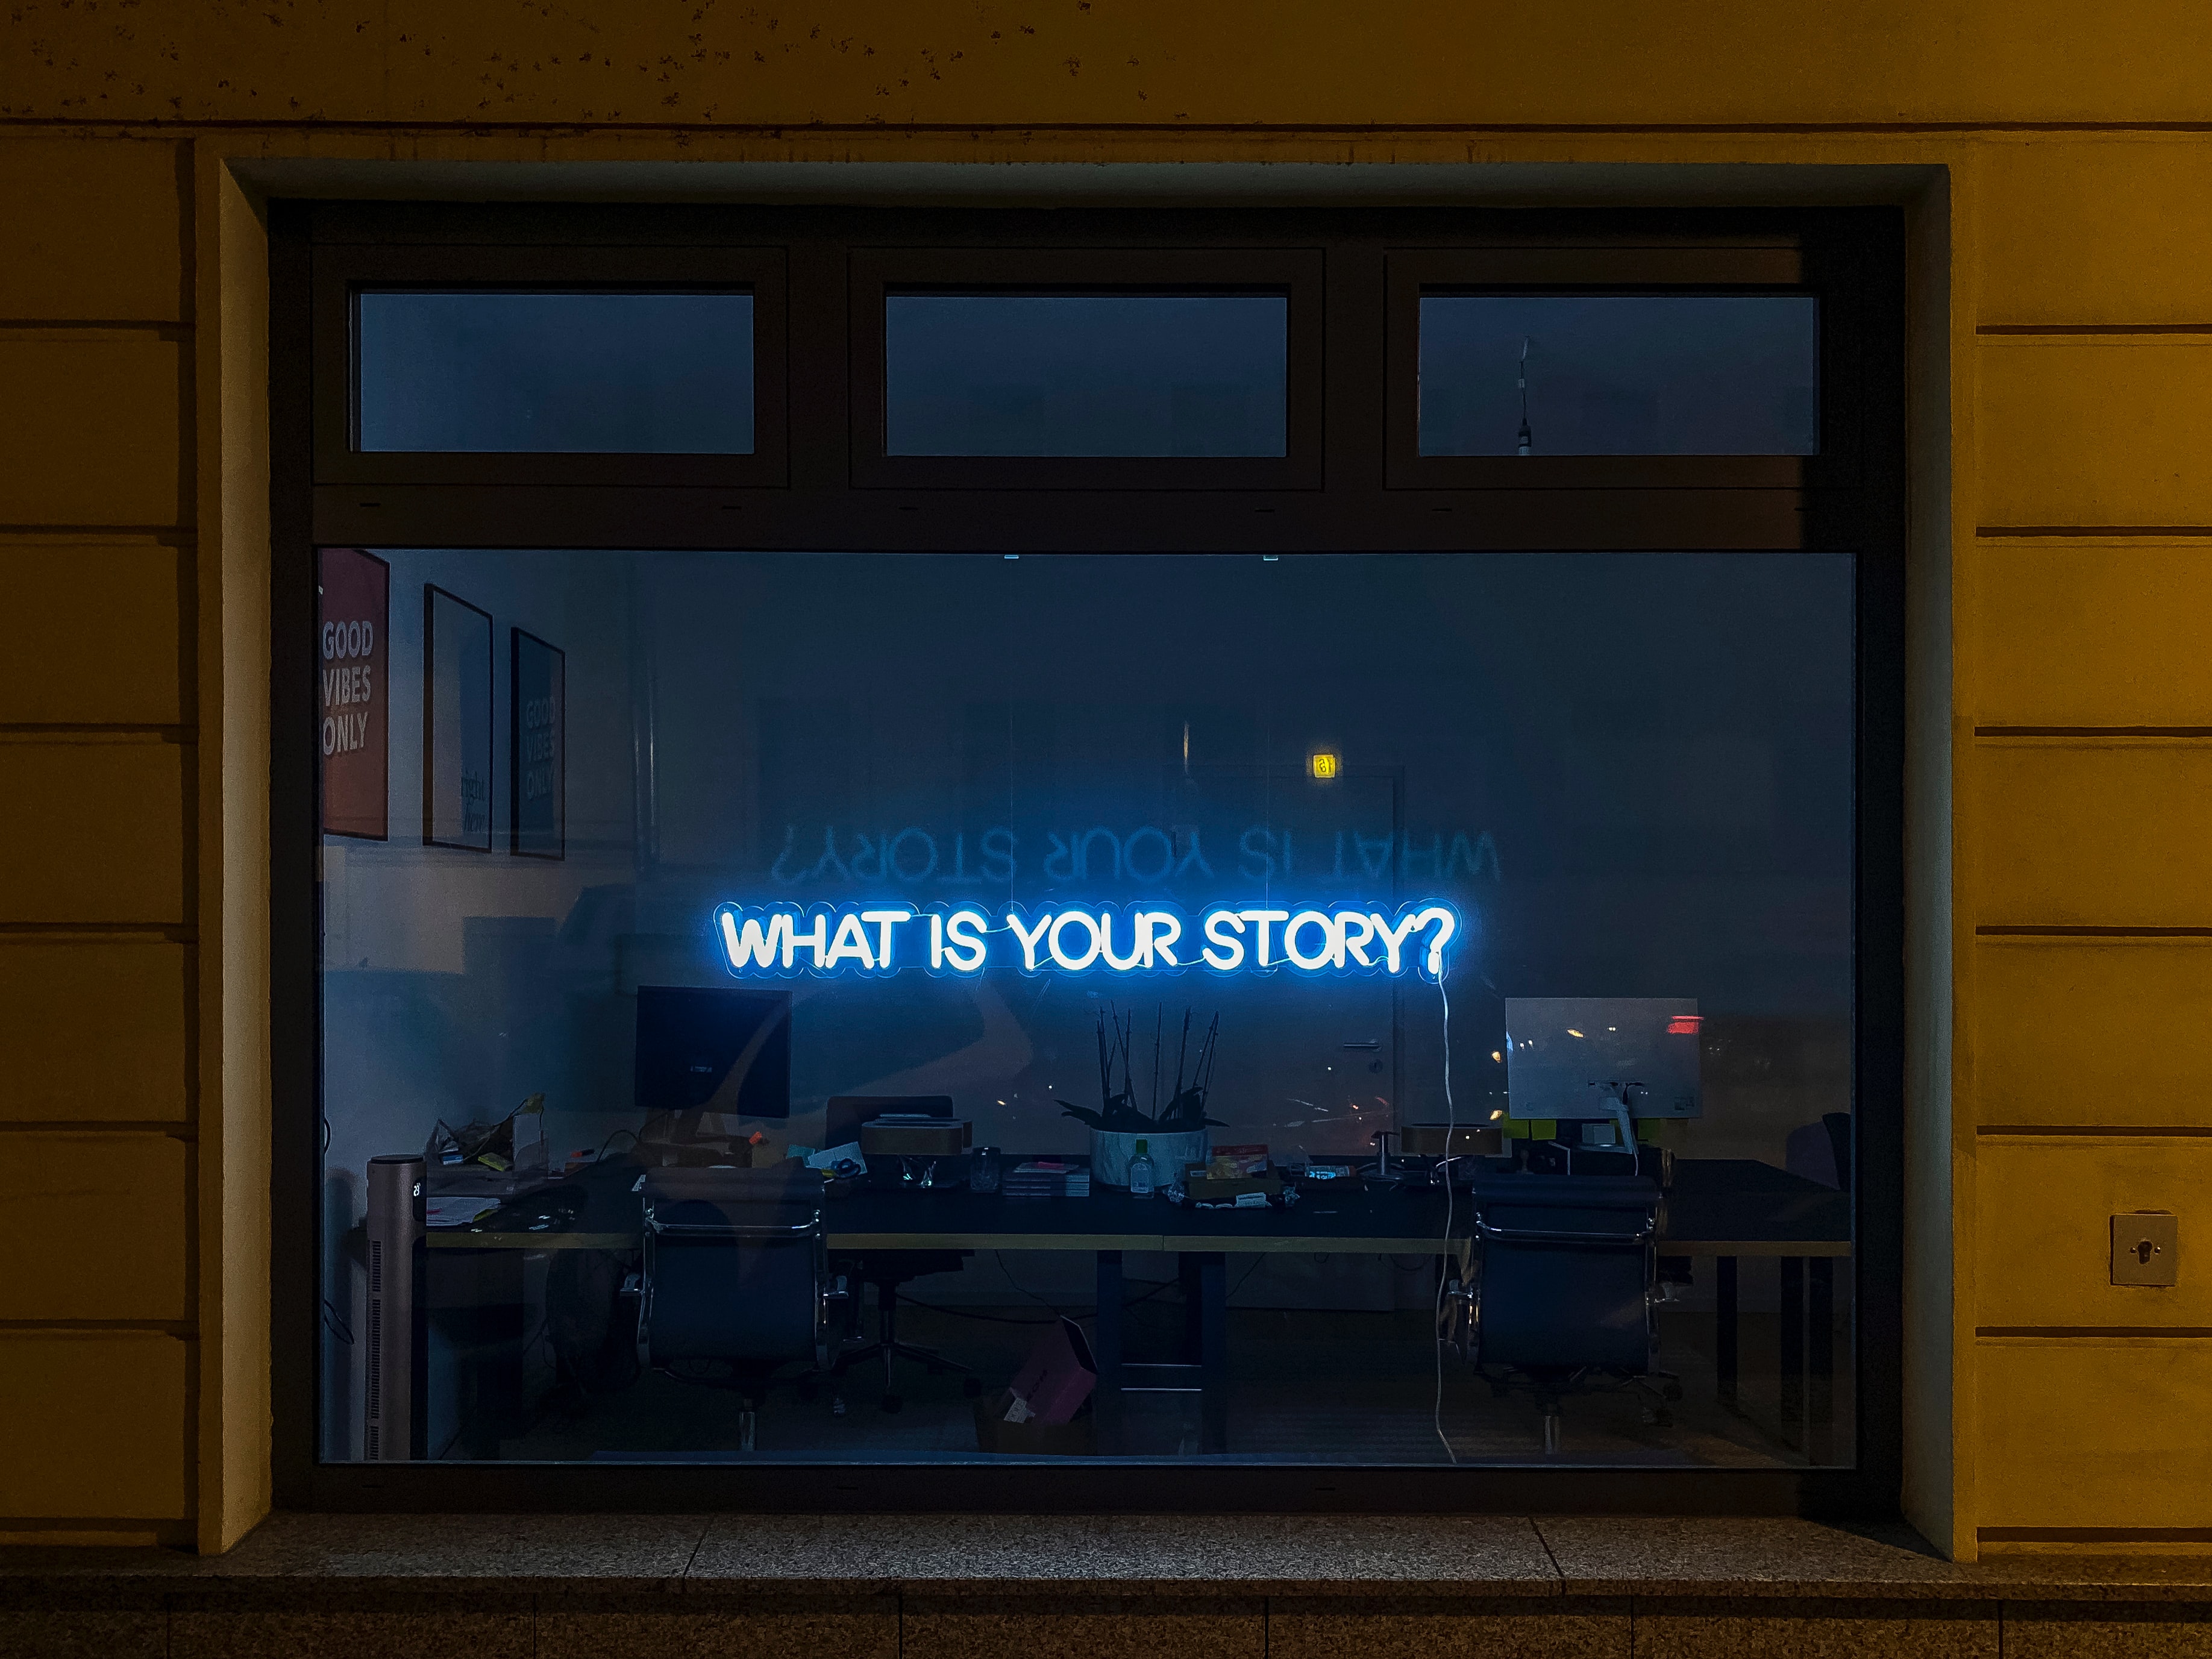 A blue neon sign in a window display reads 'What is your story?'